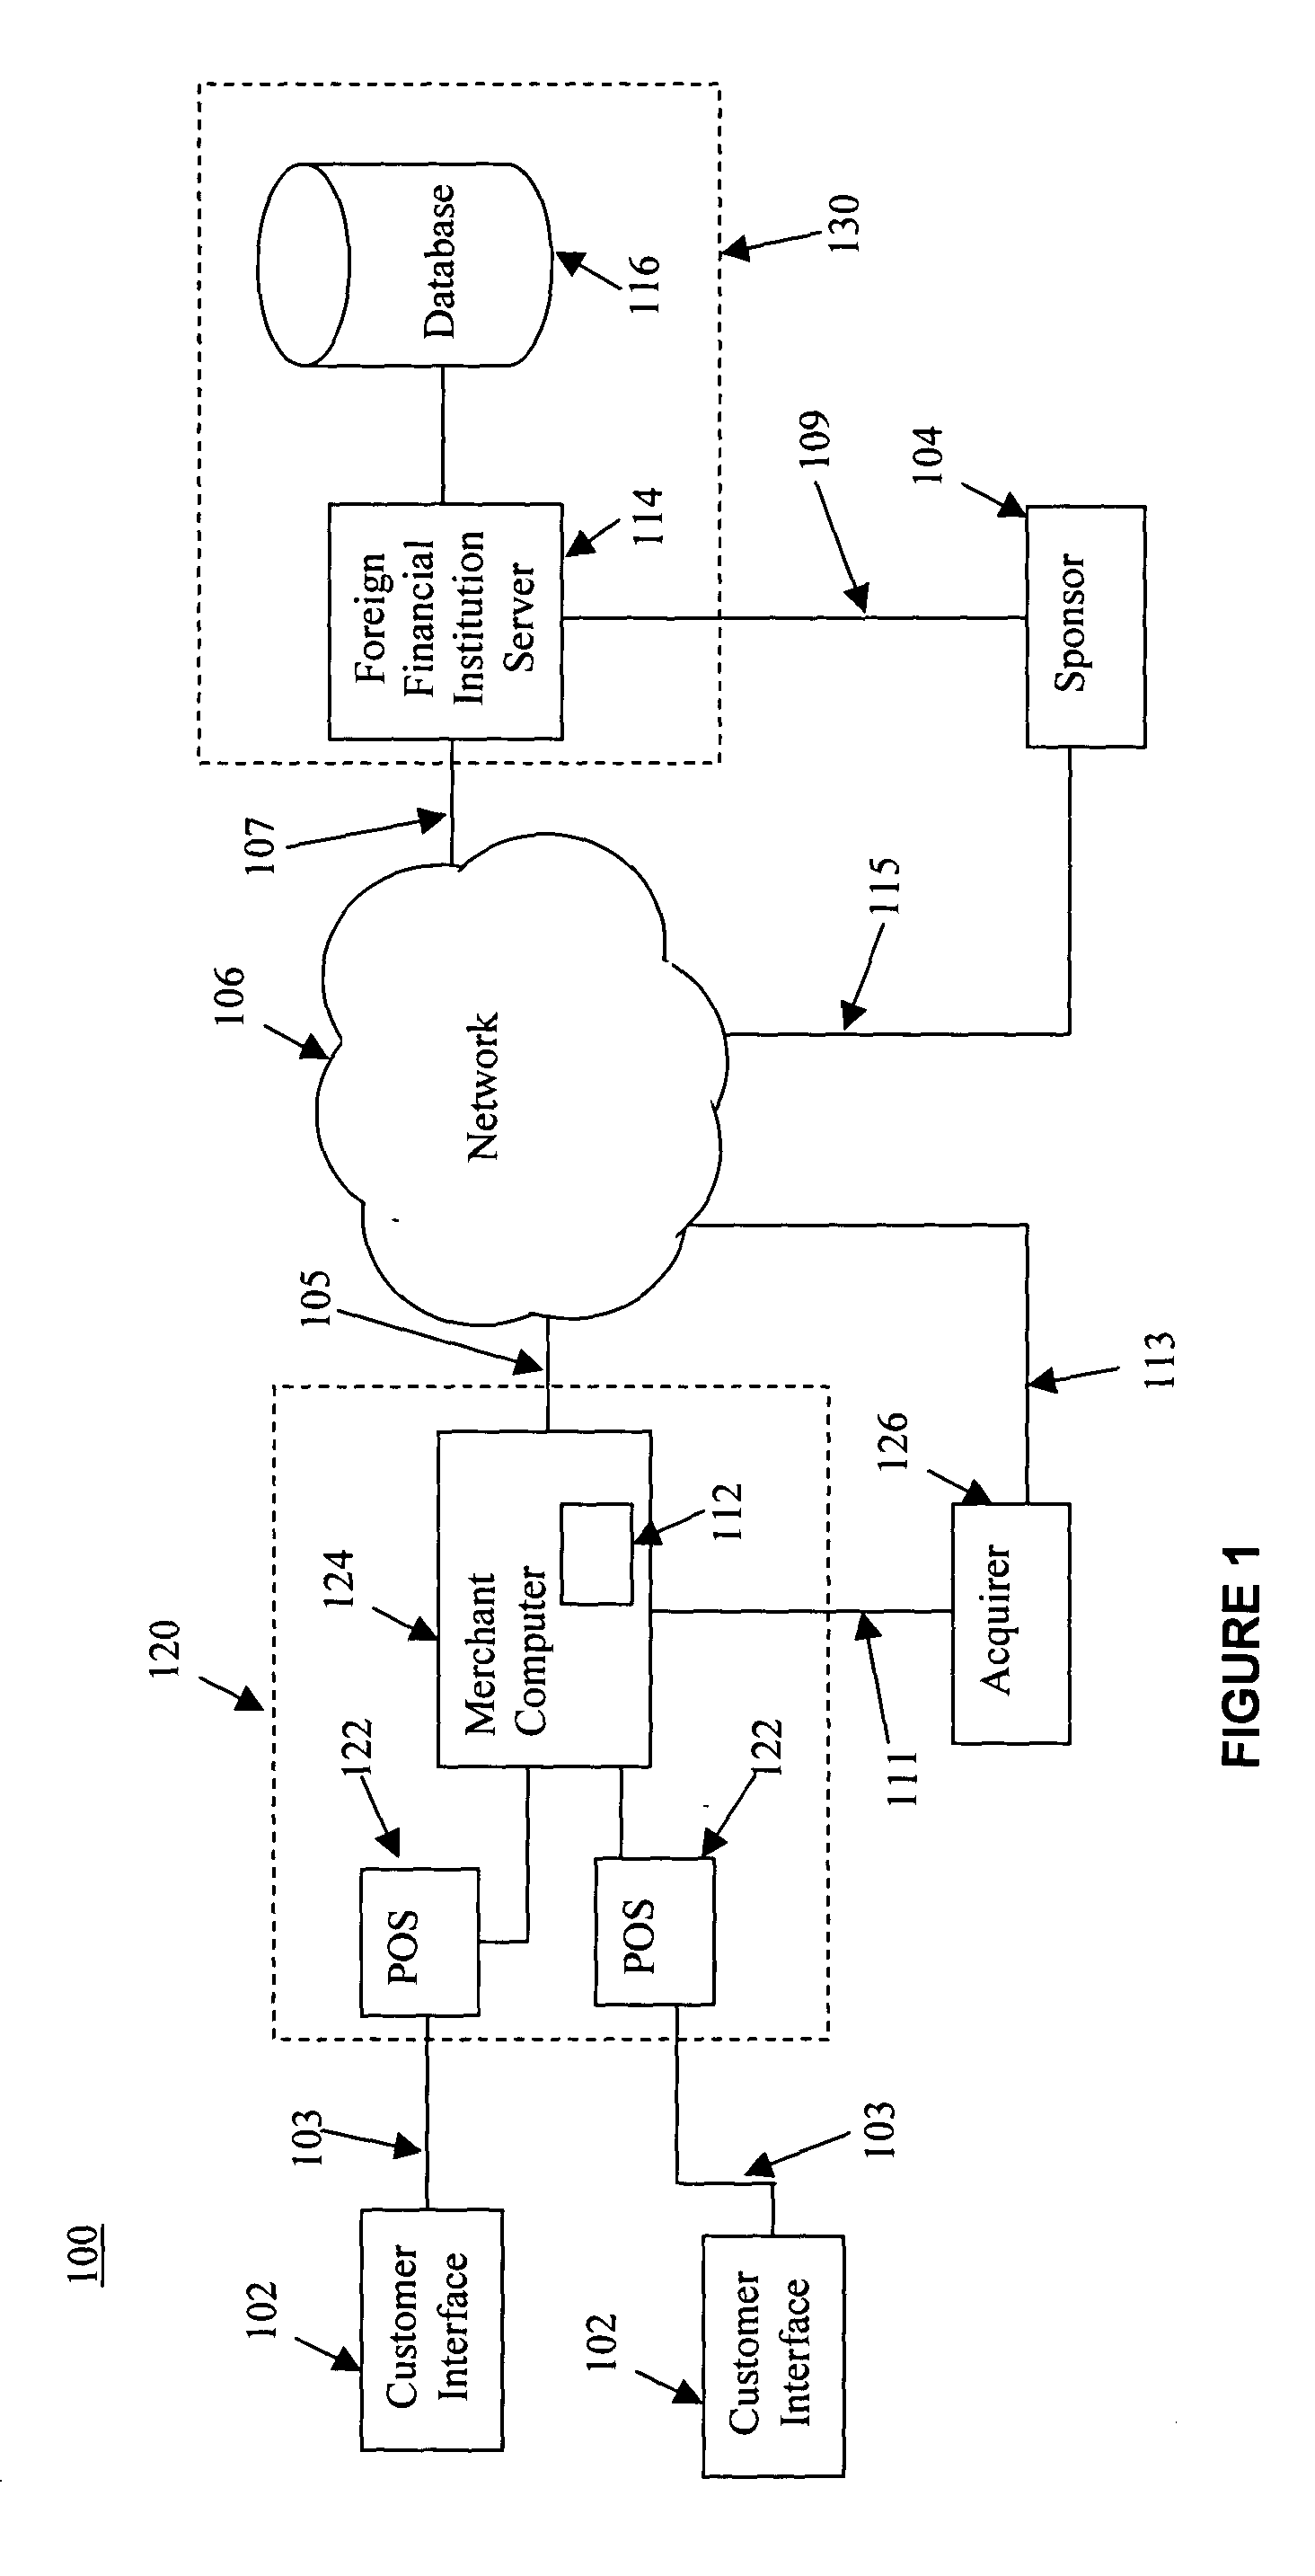 System and method for facilitating a subsidiary card account with controlled spending capability